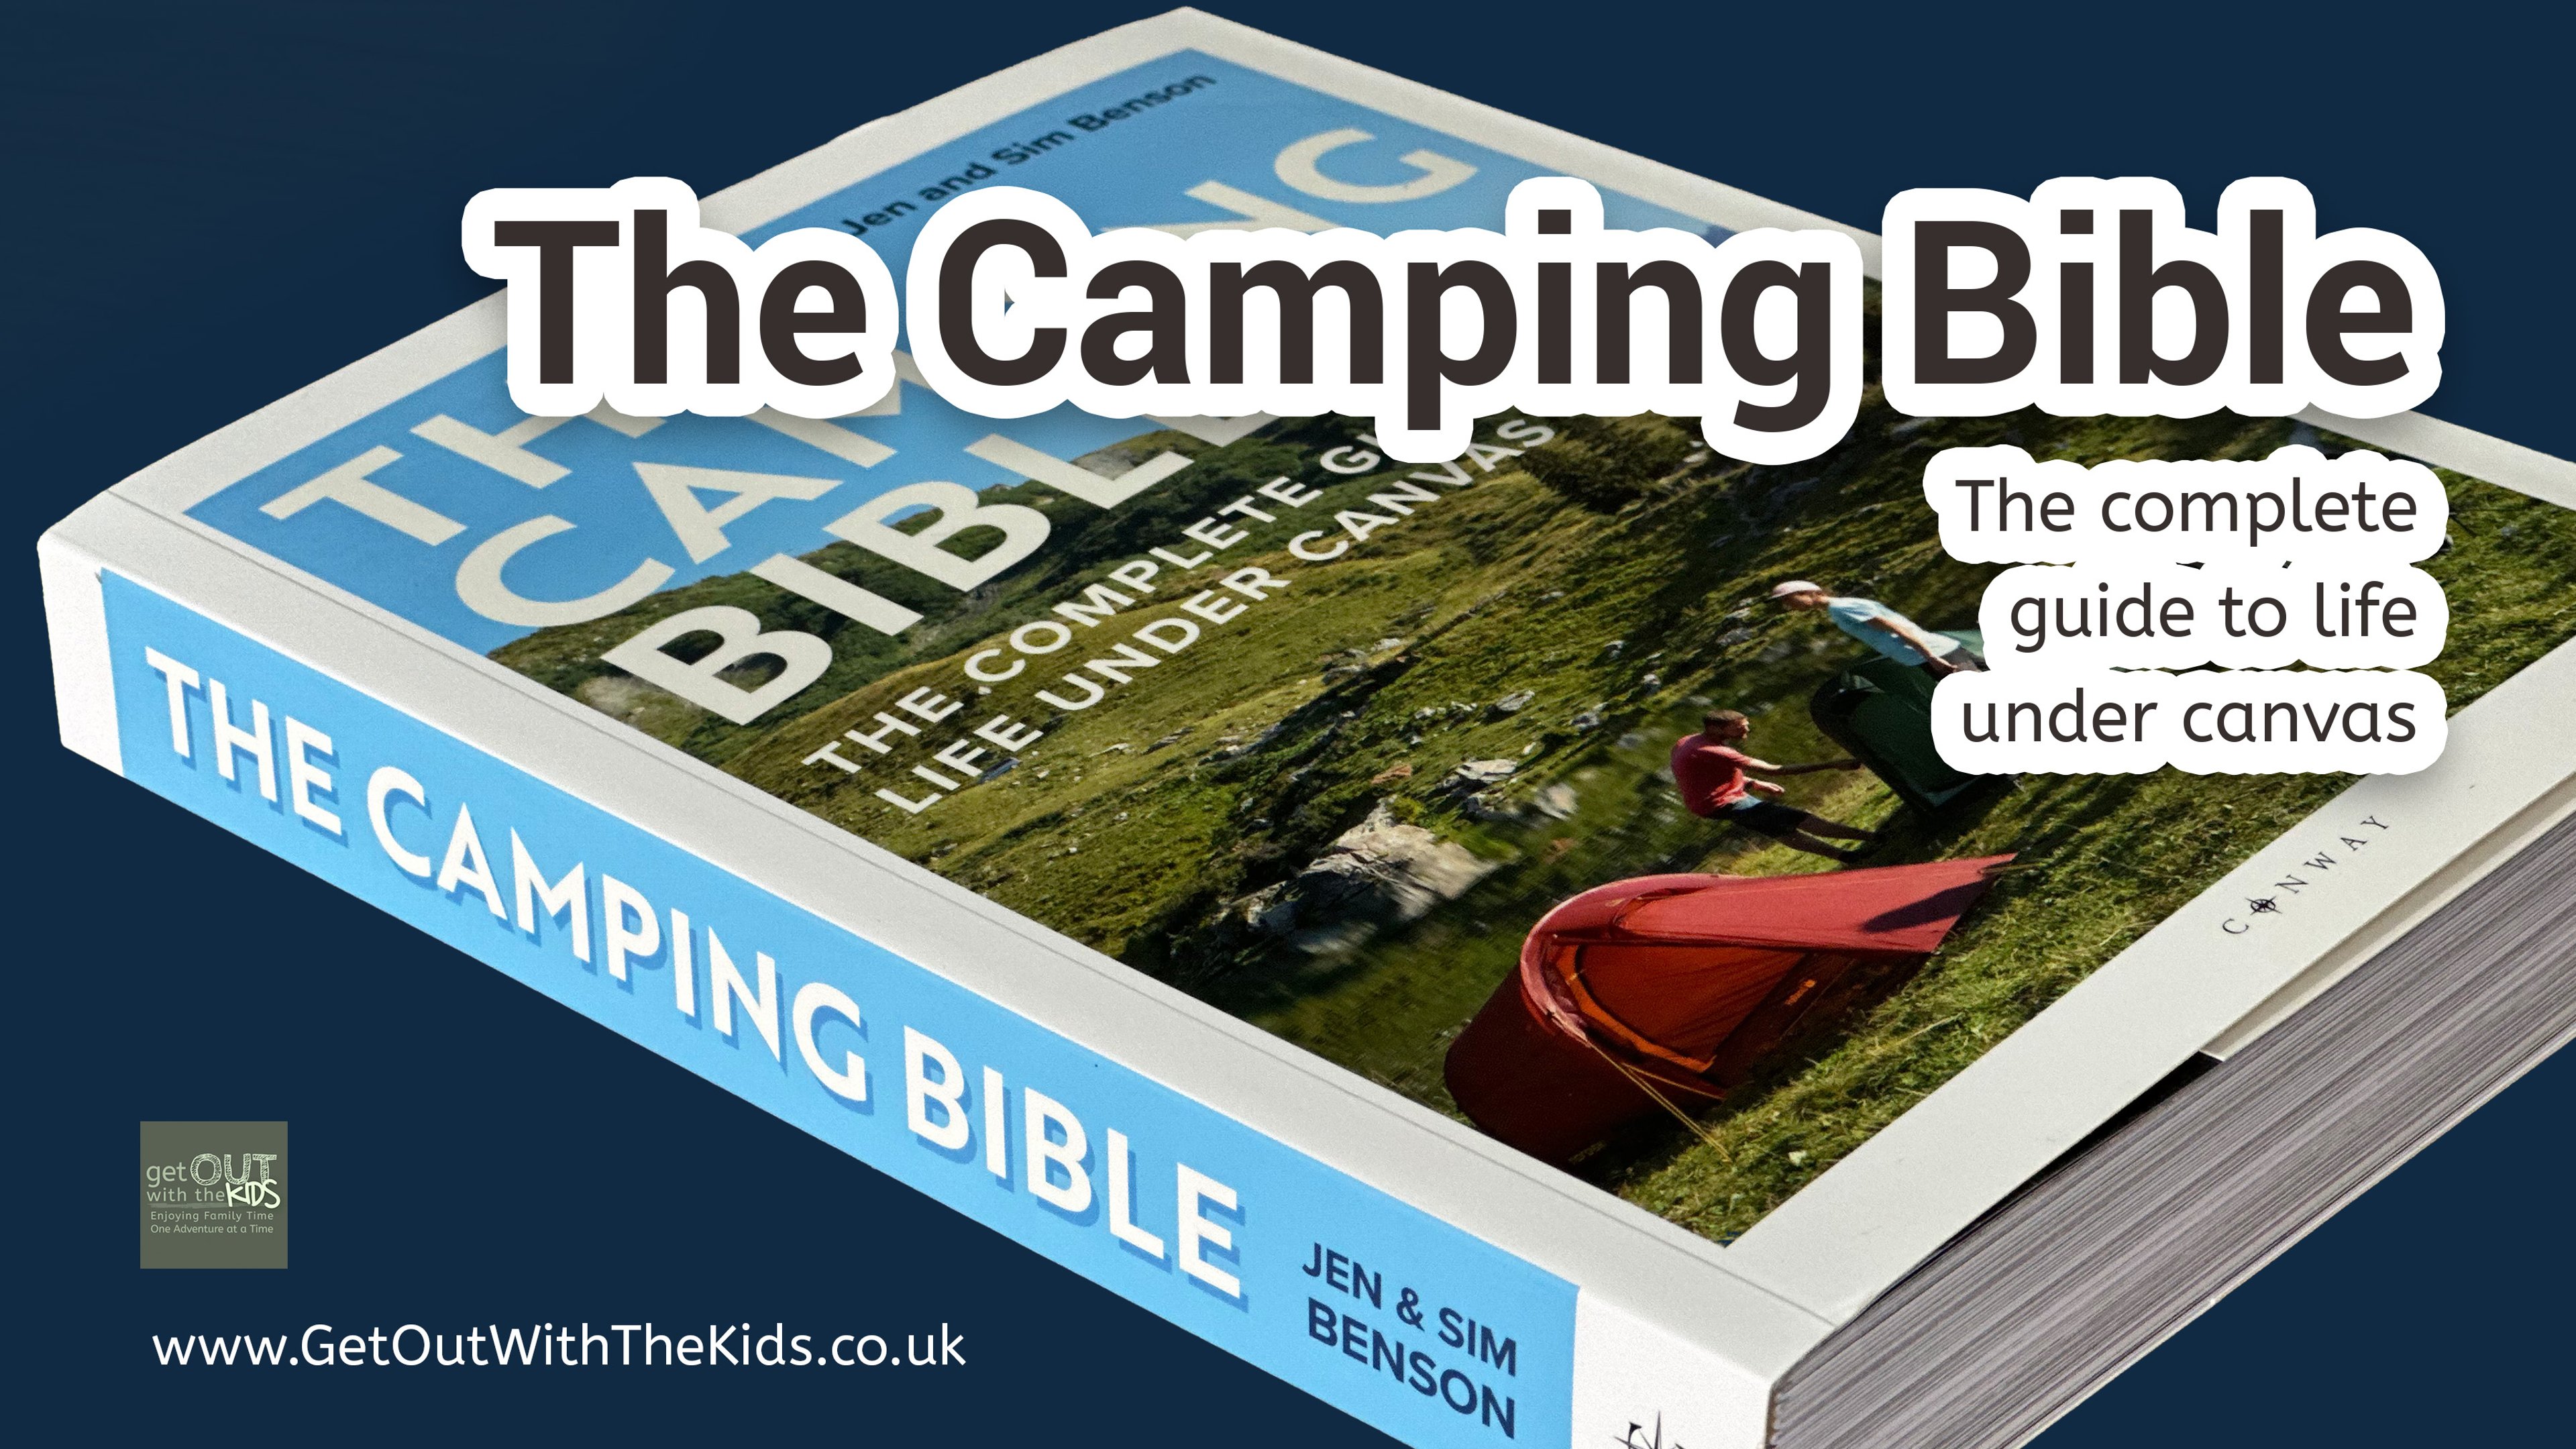 The Camping Bible book showing the book cover